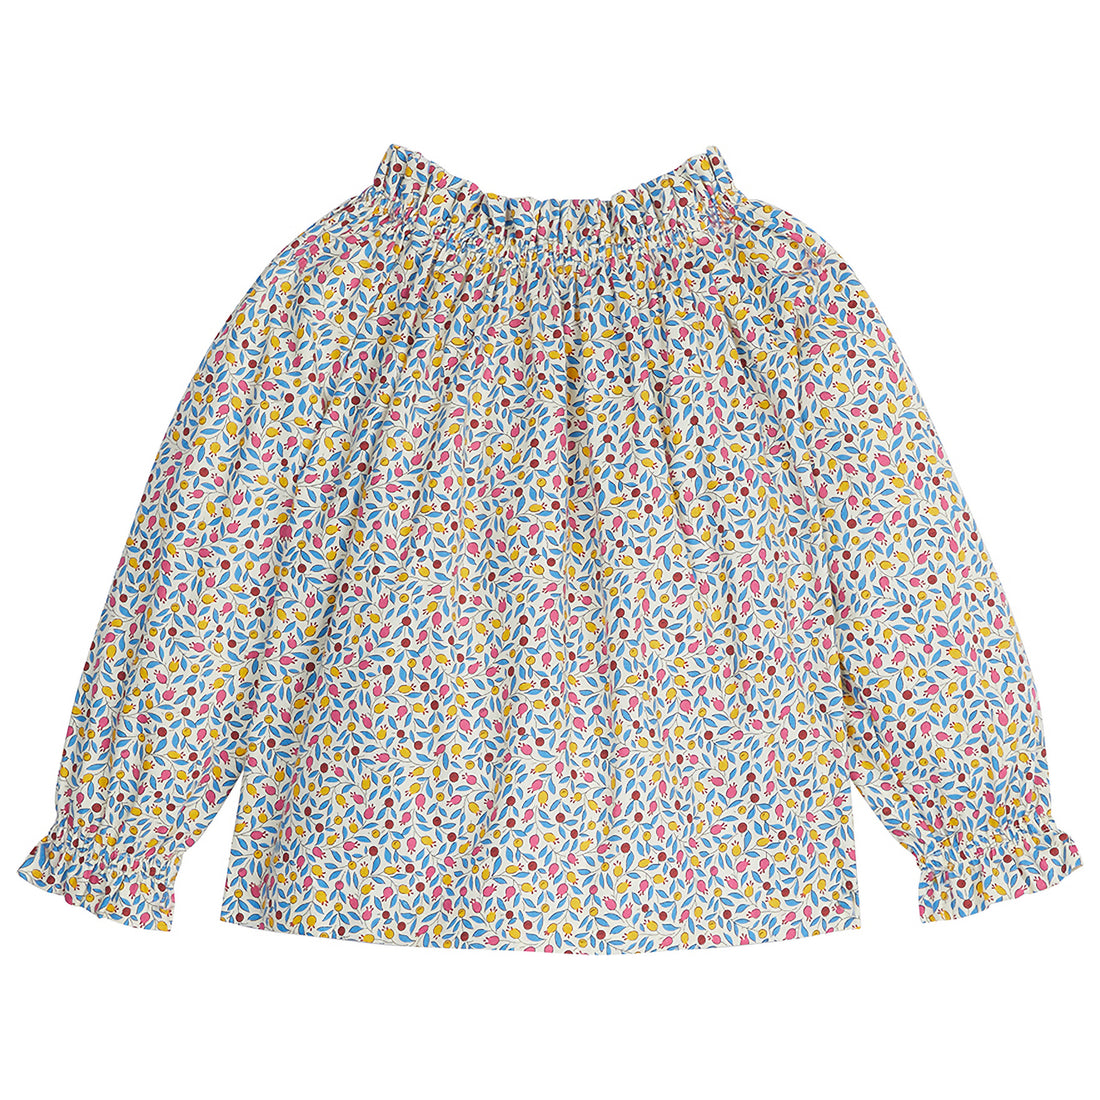 Long Sleeve white underlay top with little berry pattern (light pink/yellow/blue/red) and slight ruffle on end of sleeves--ToryTop BISBY girls/teens